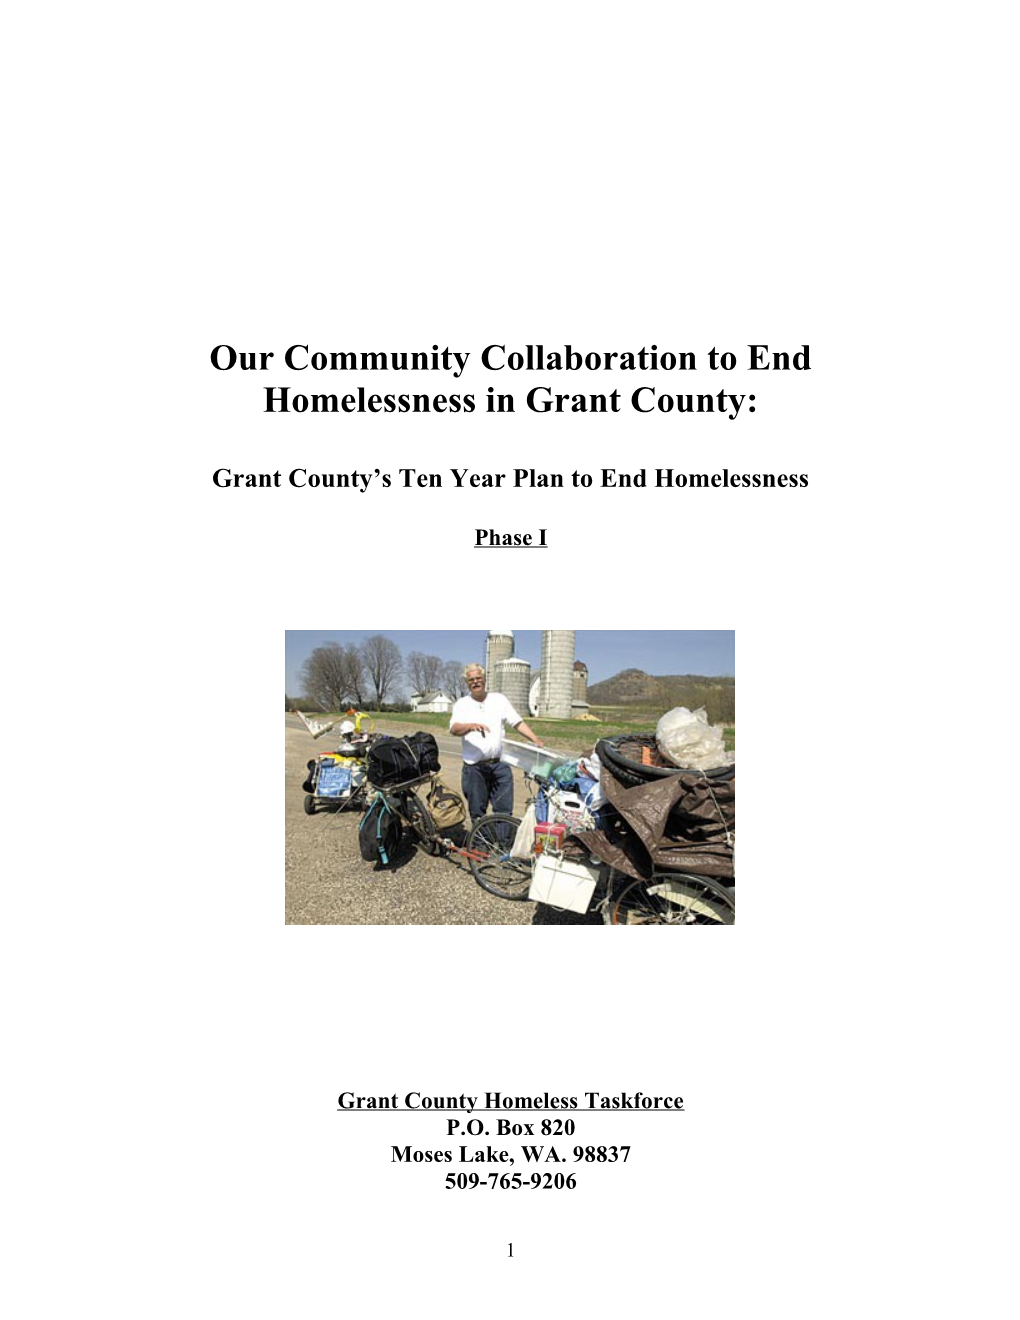 Our Community Collaboration to End Homelessness in Grant County